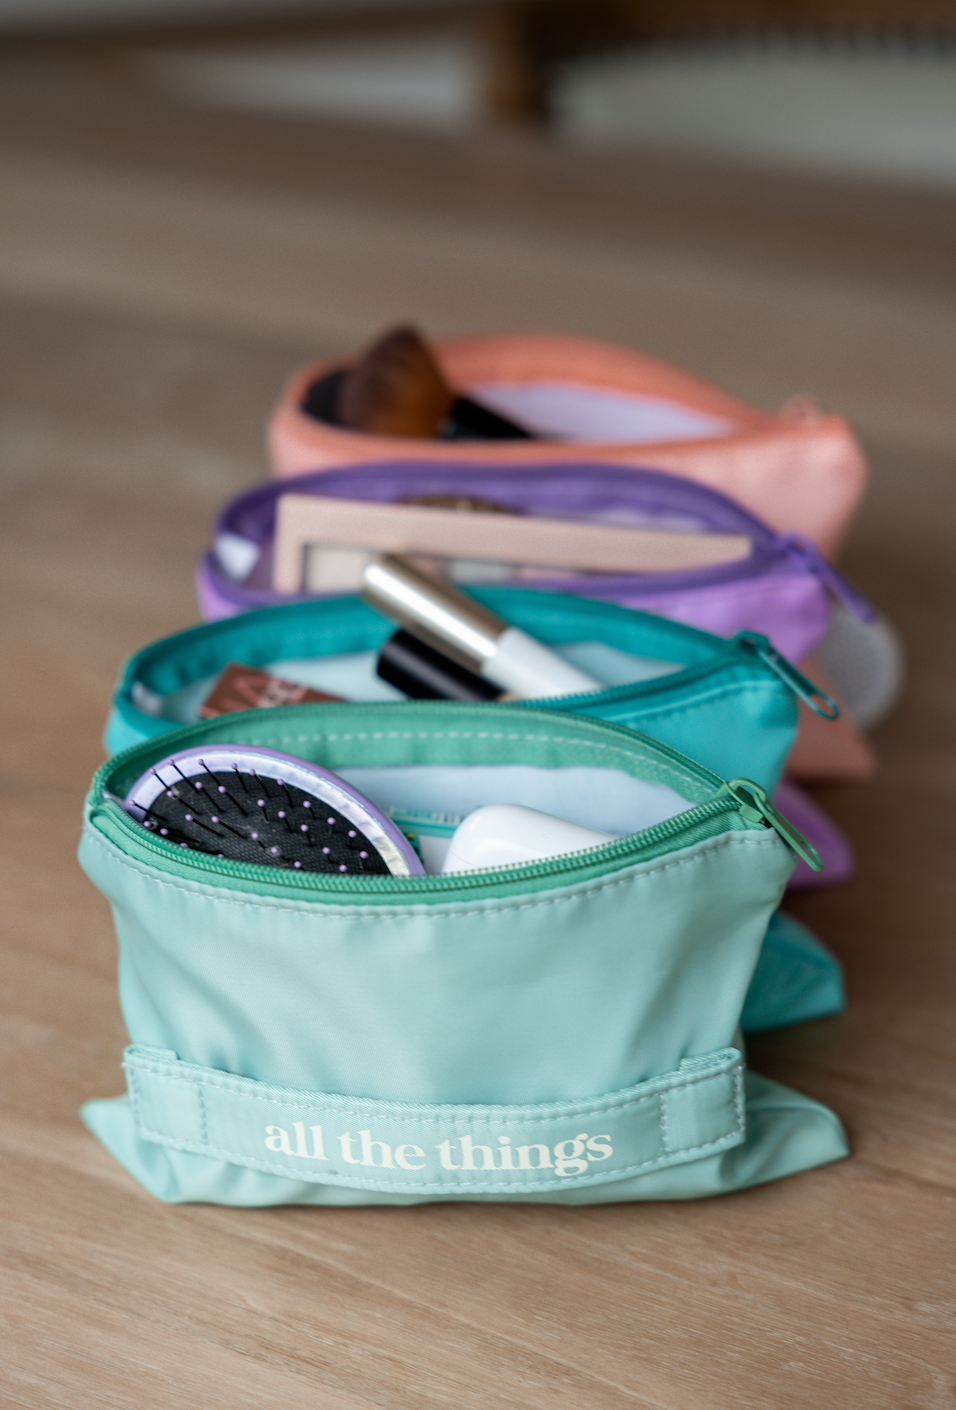 Expandable Organizer - All The Things